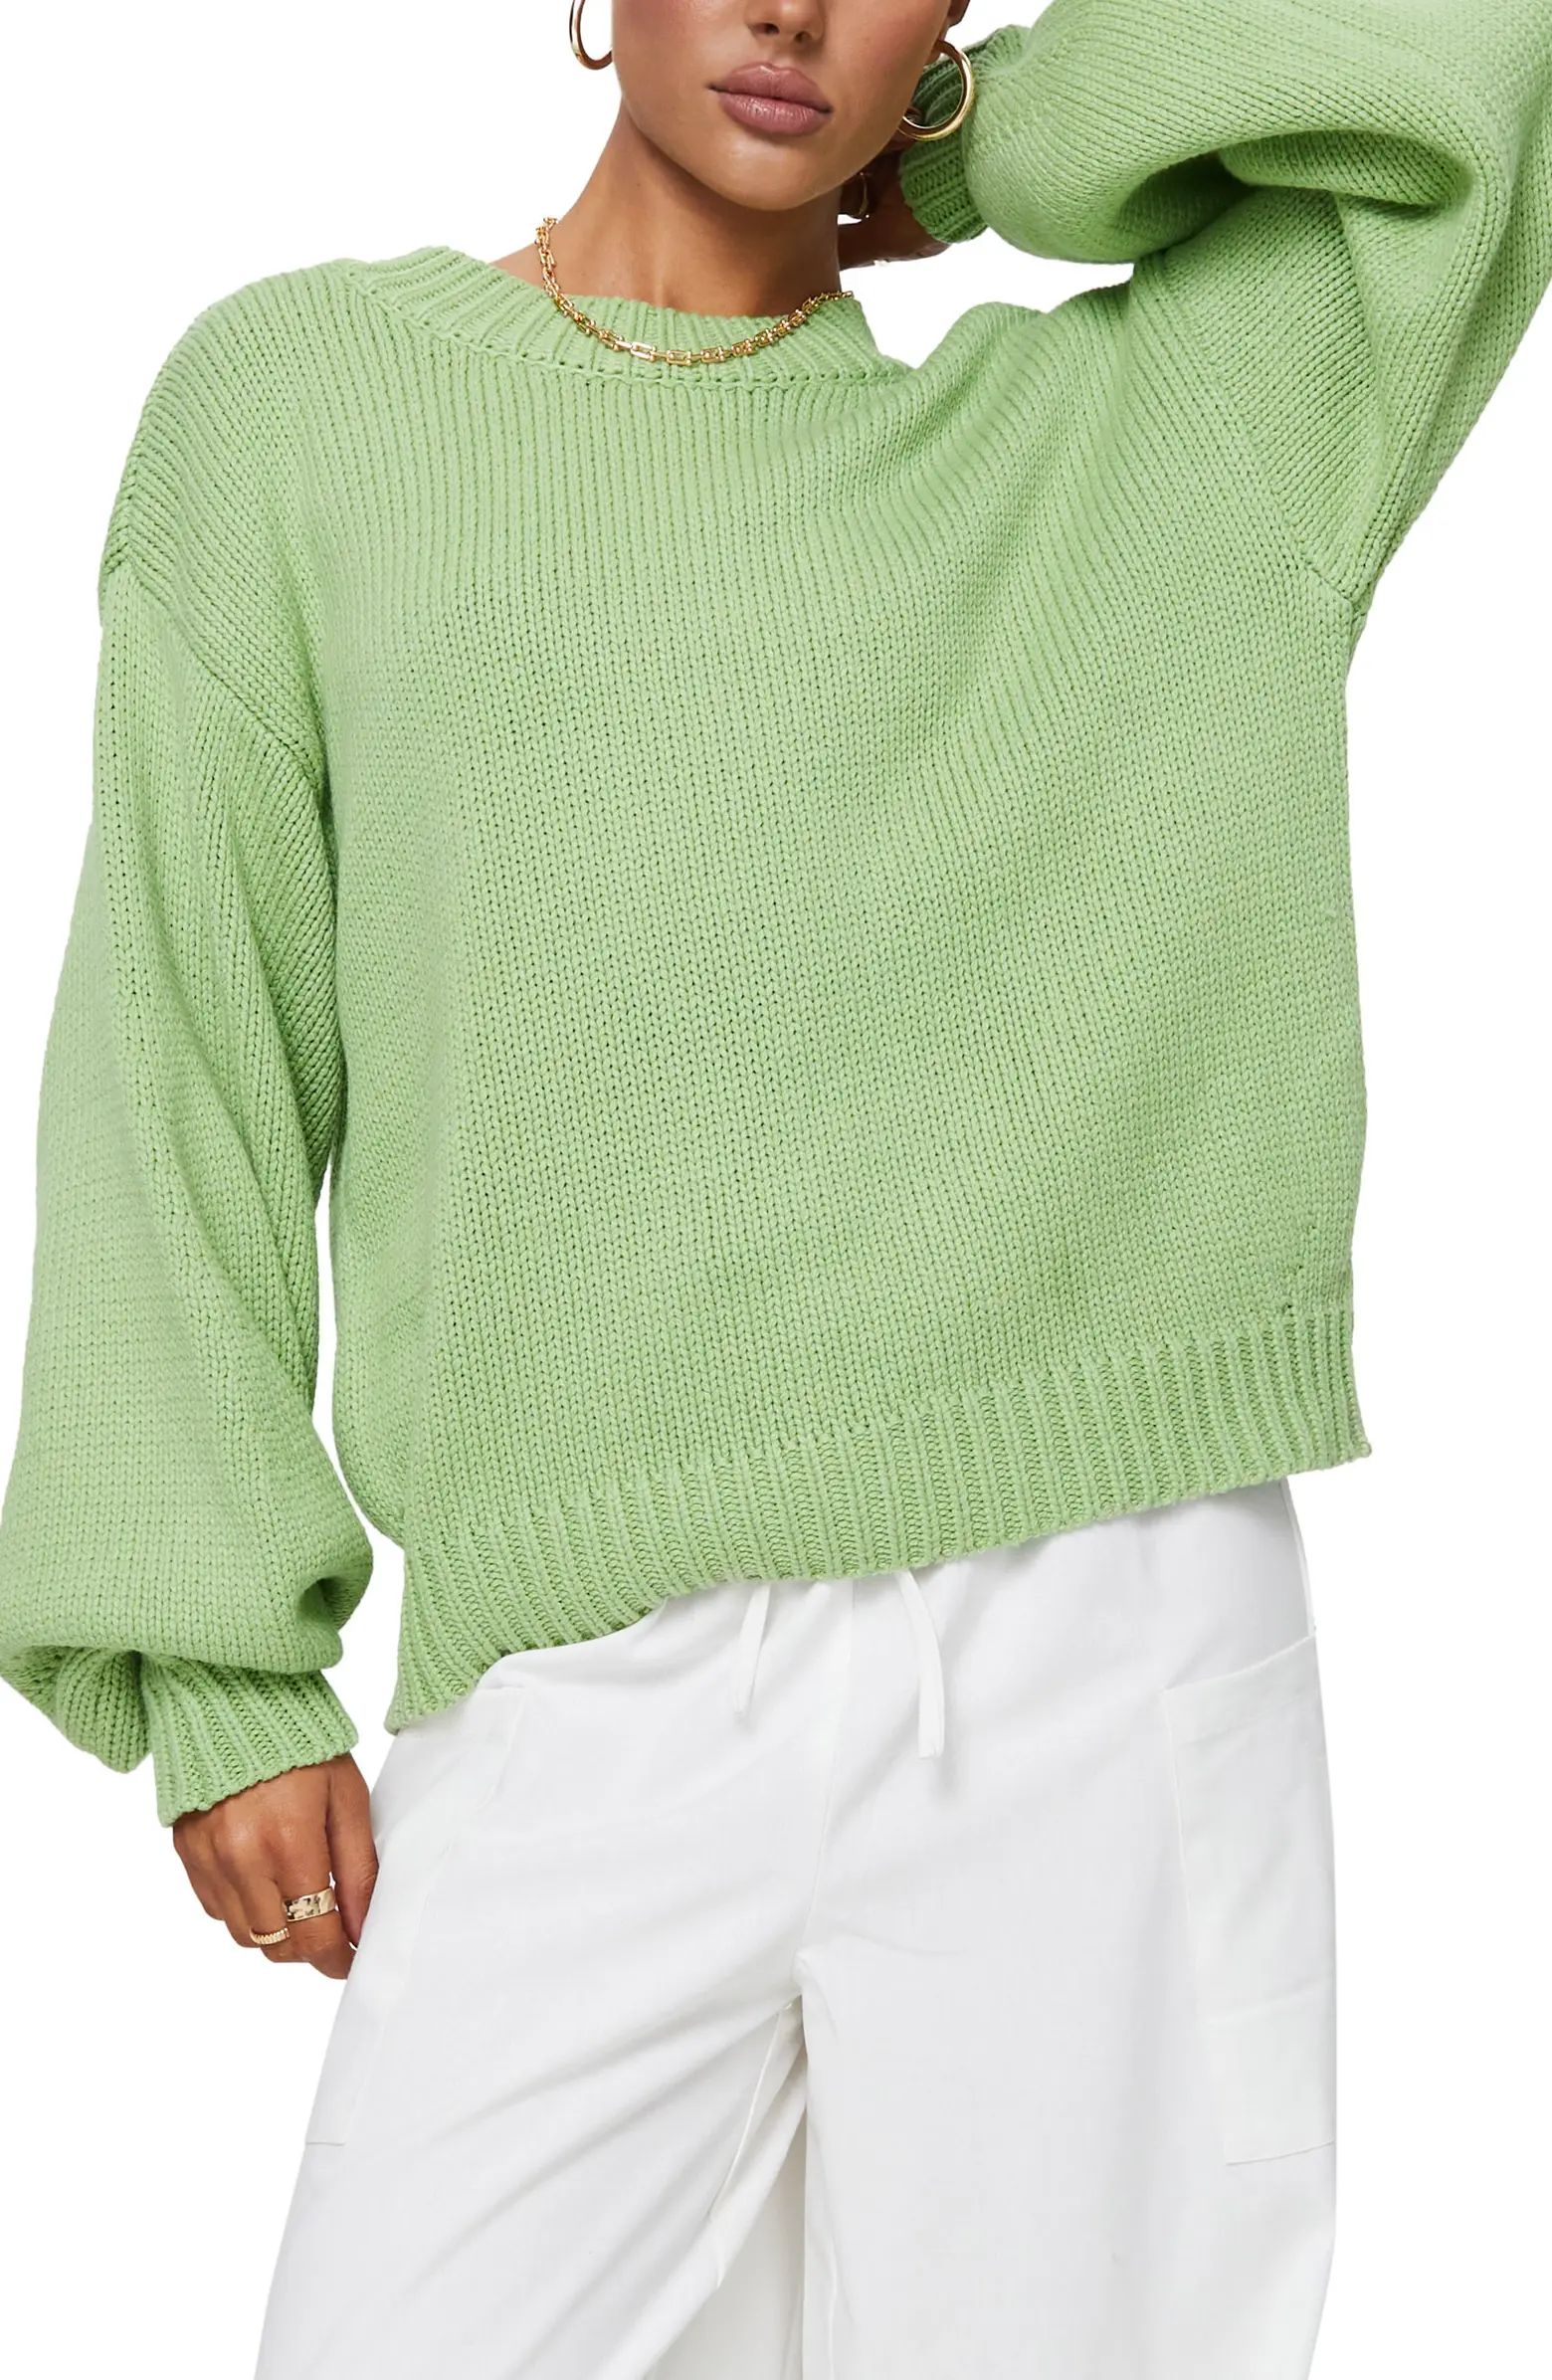 Princess Polly Harmony Balloon Sleeve Sweater | Nordstrom | Nordstrom